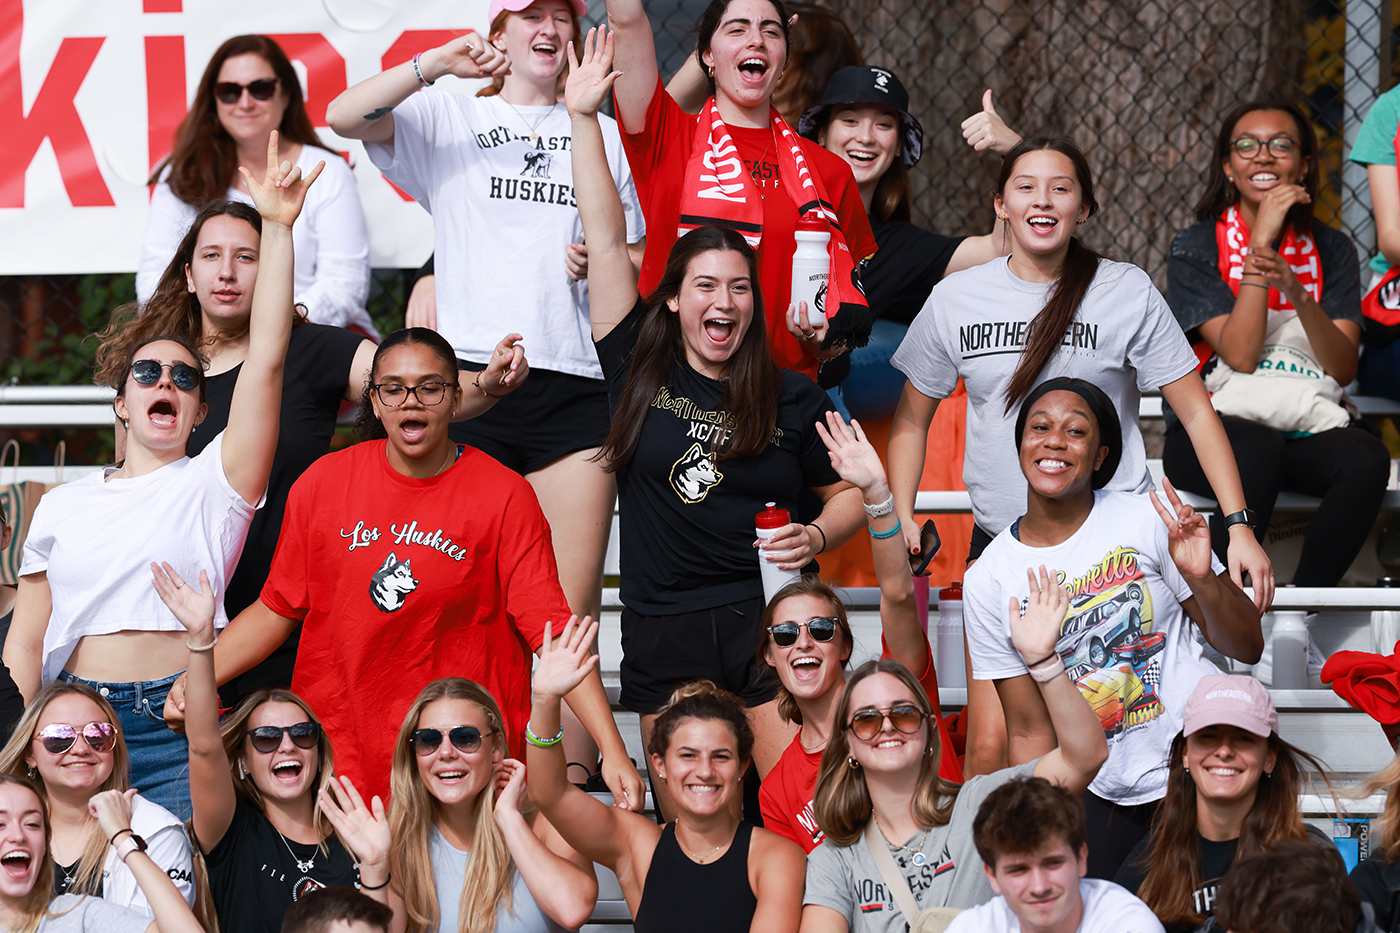 A crowd of people is cheering on the Northeastern women's soccer team.